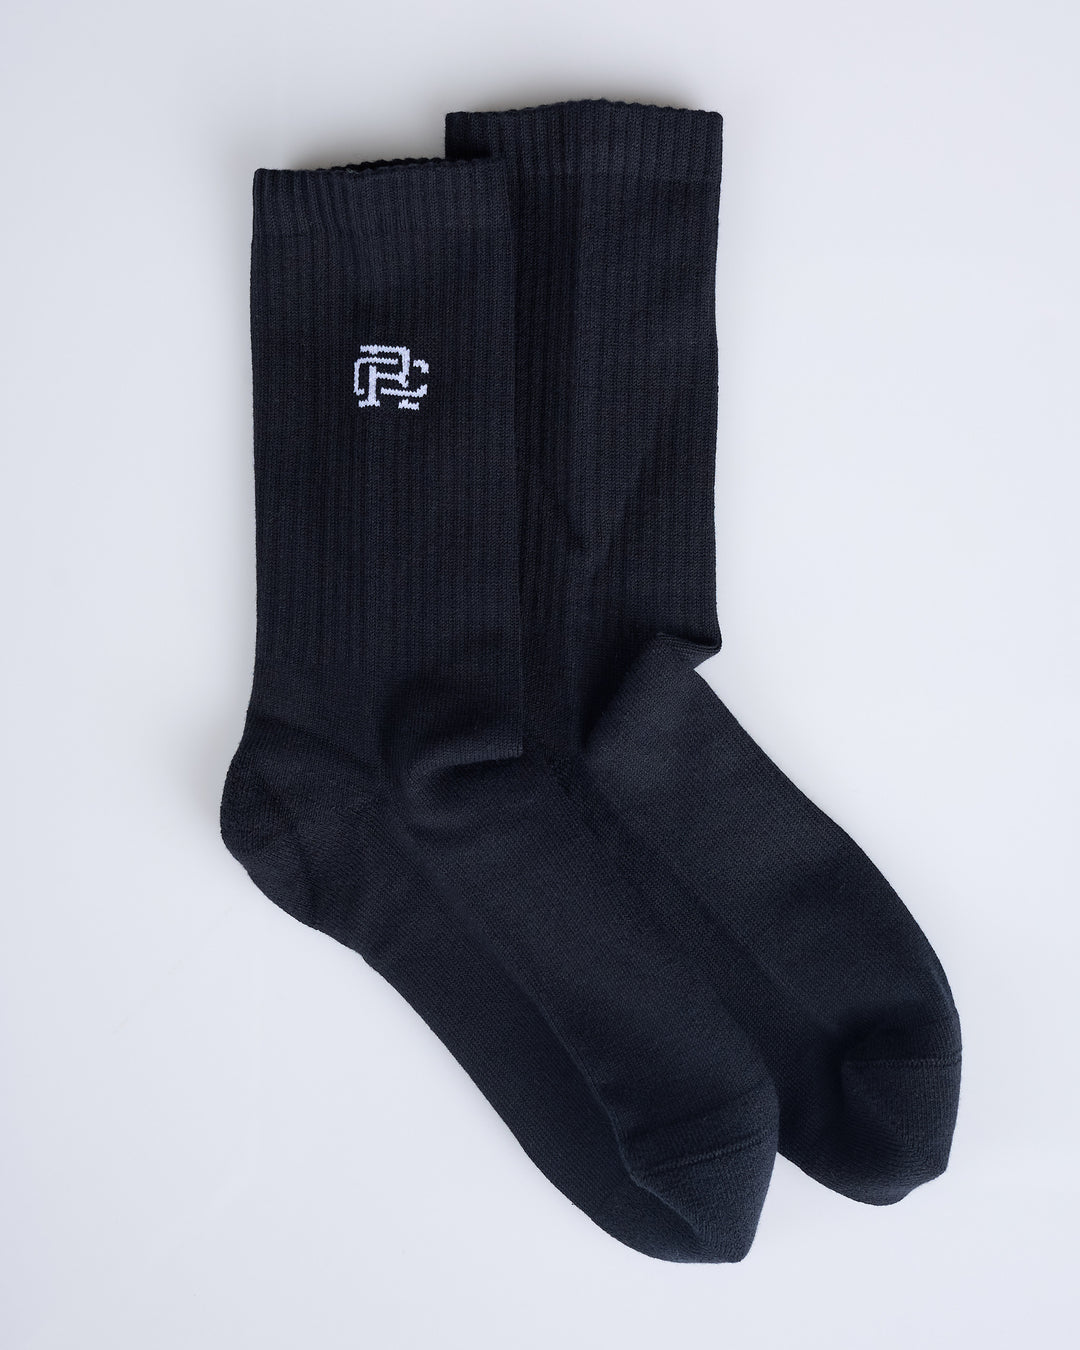 Reigning Champ Knit Classic Crew Sock Black/White